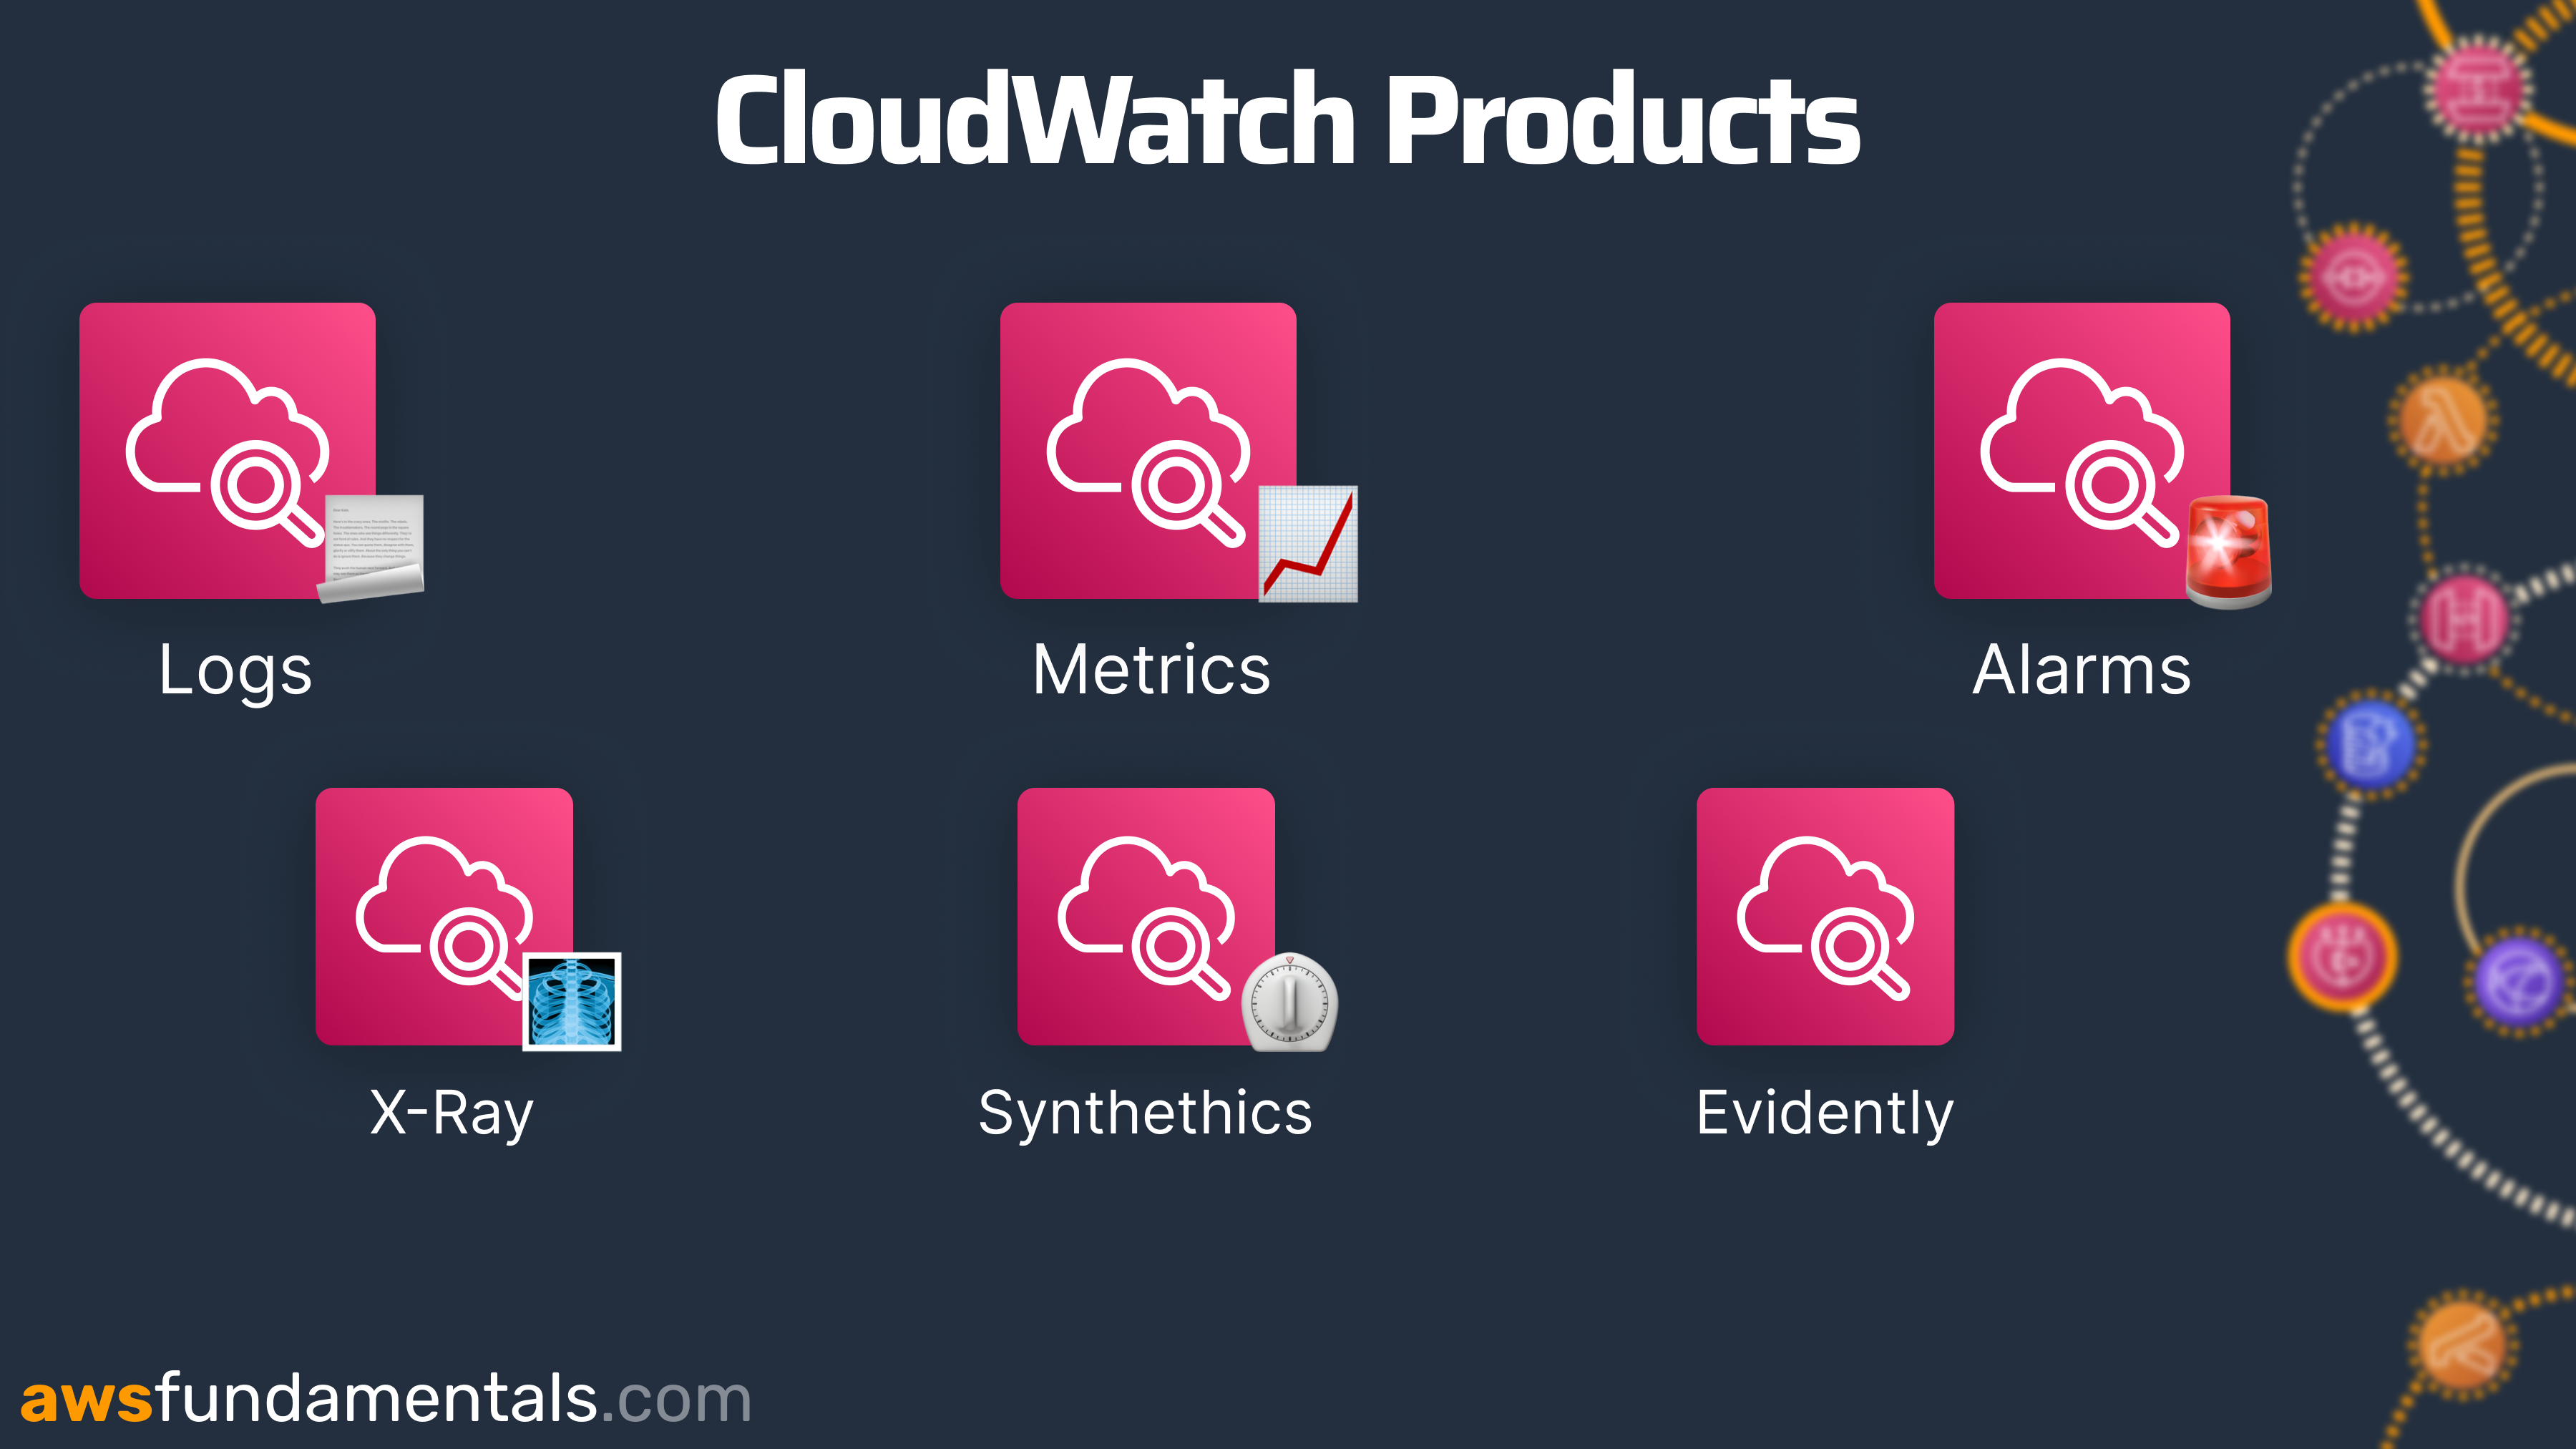 CloudWatch Products